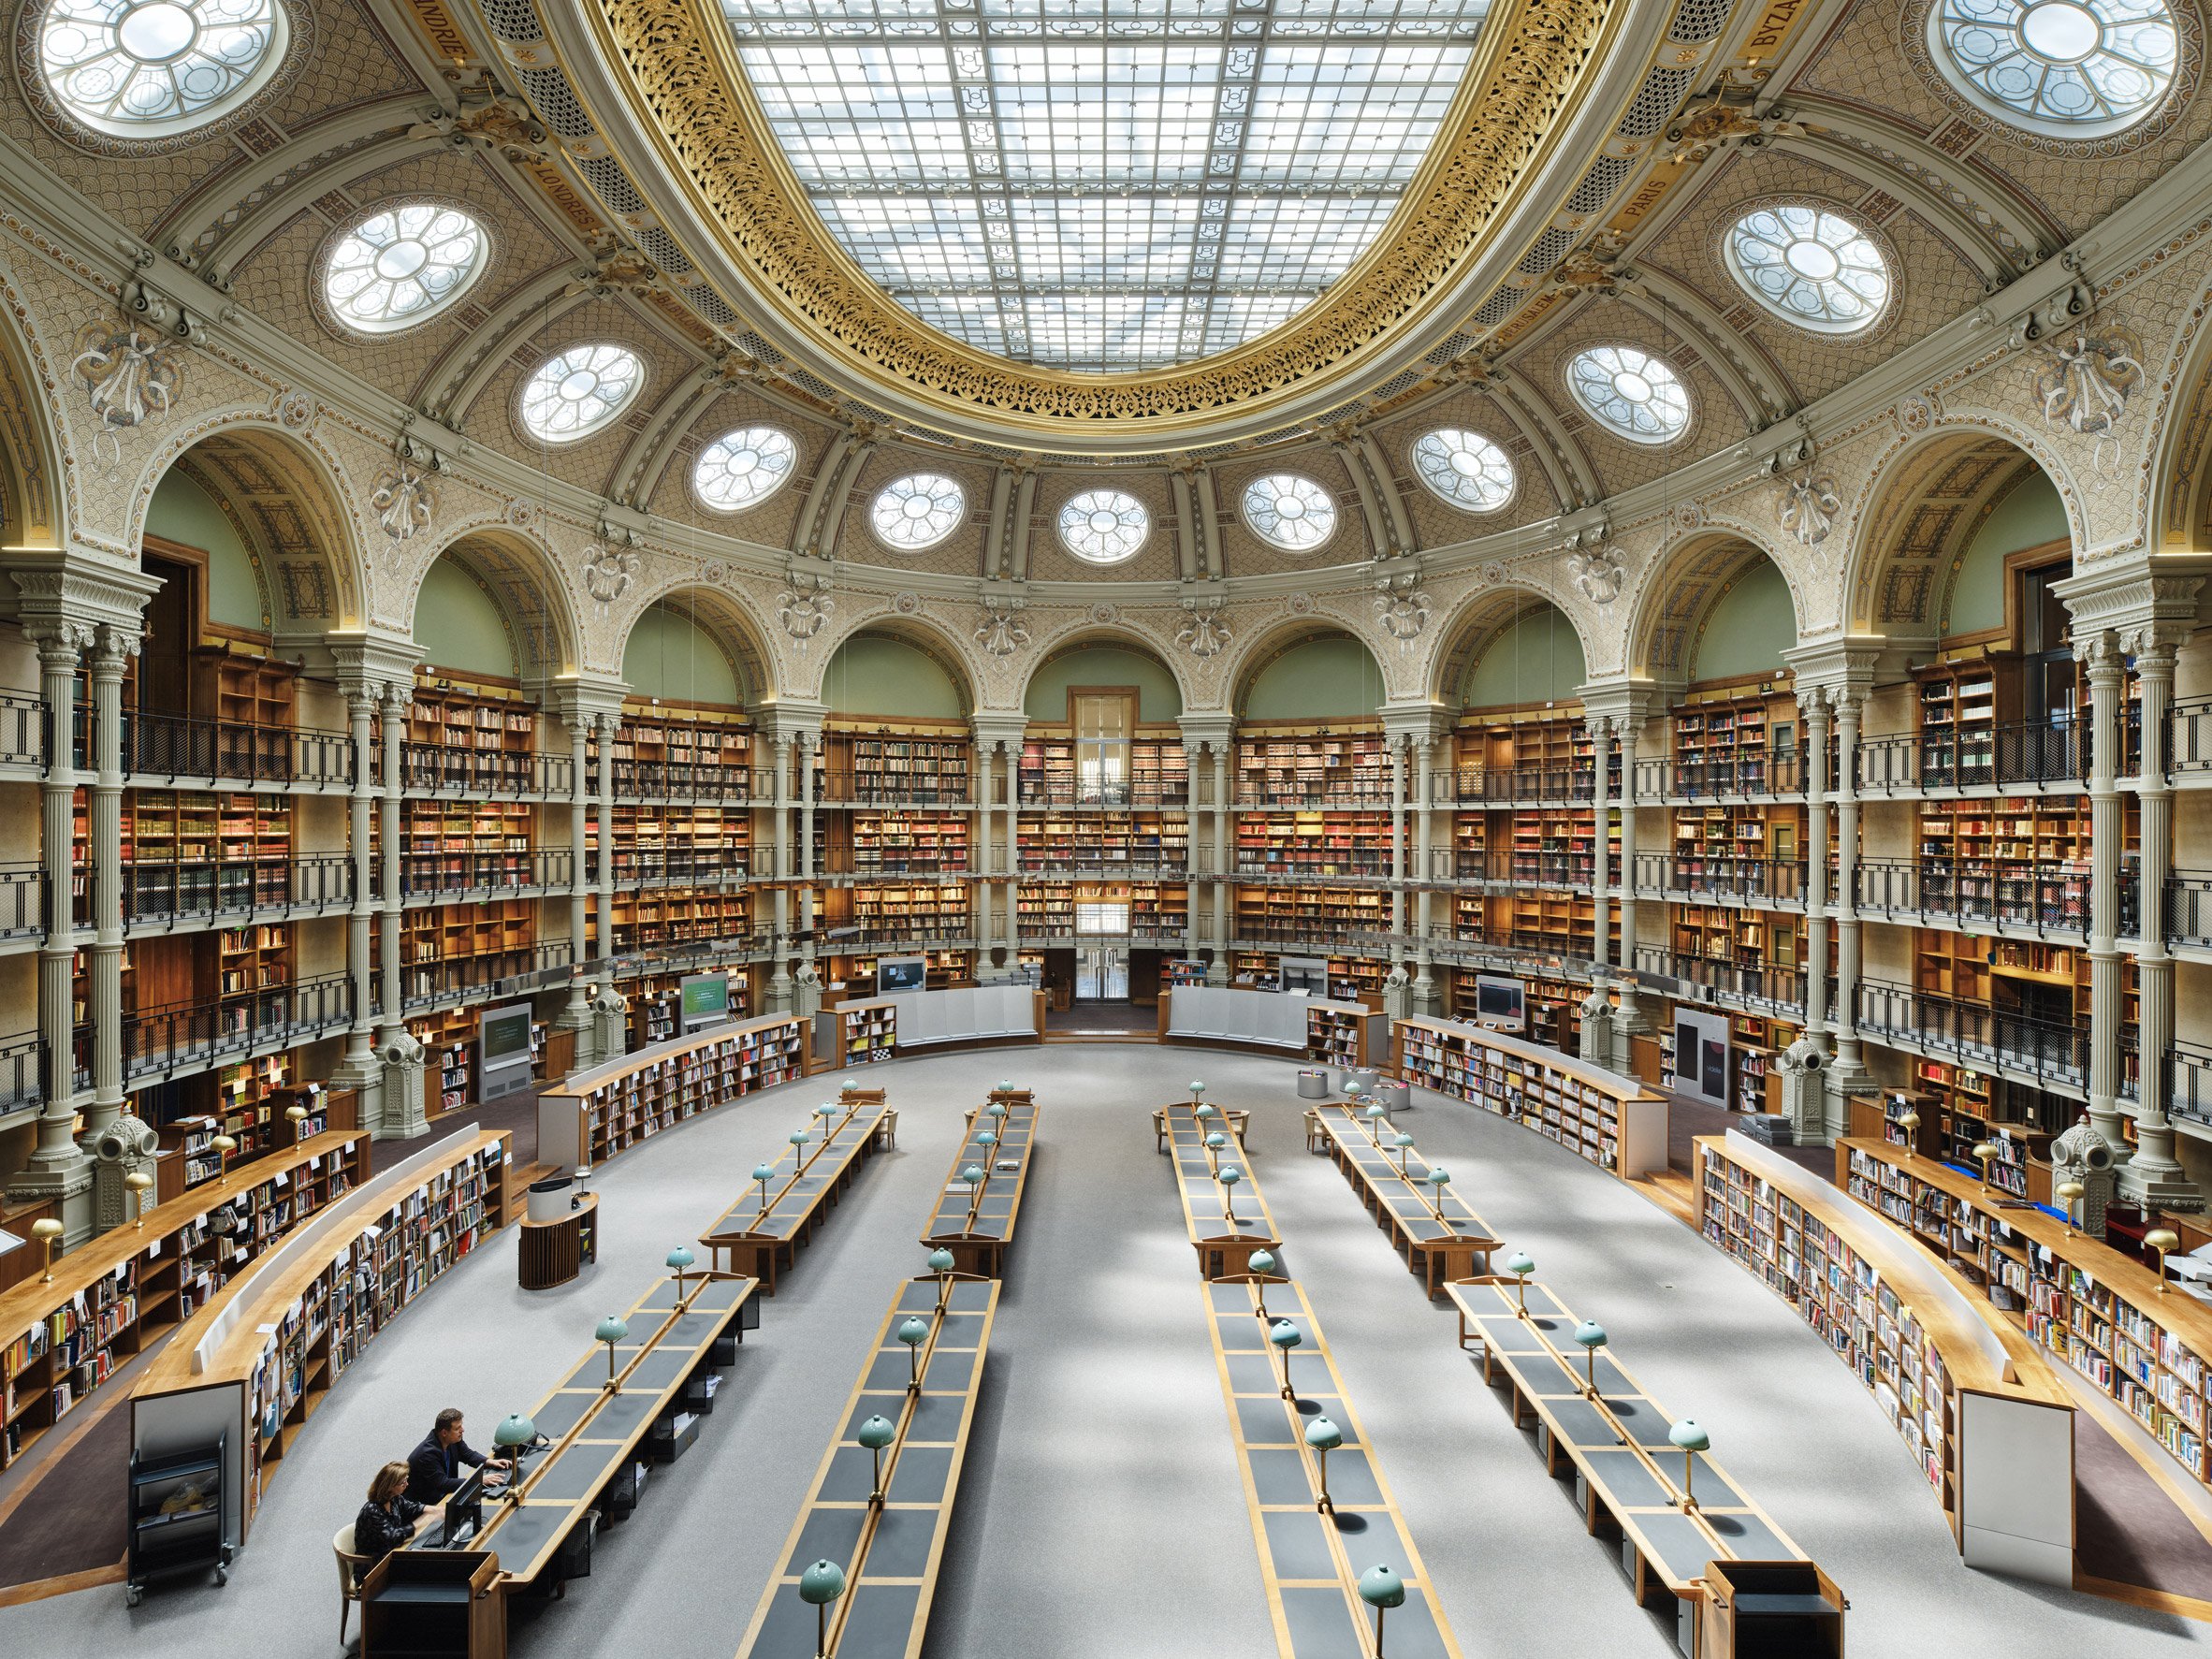 National Library of France. Photography is by Takuji Shimmura